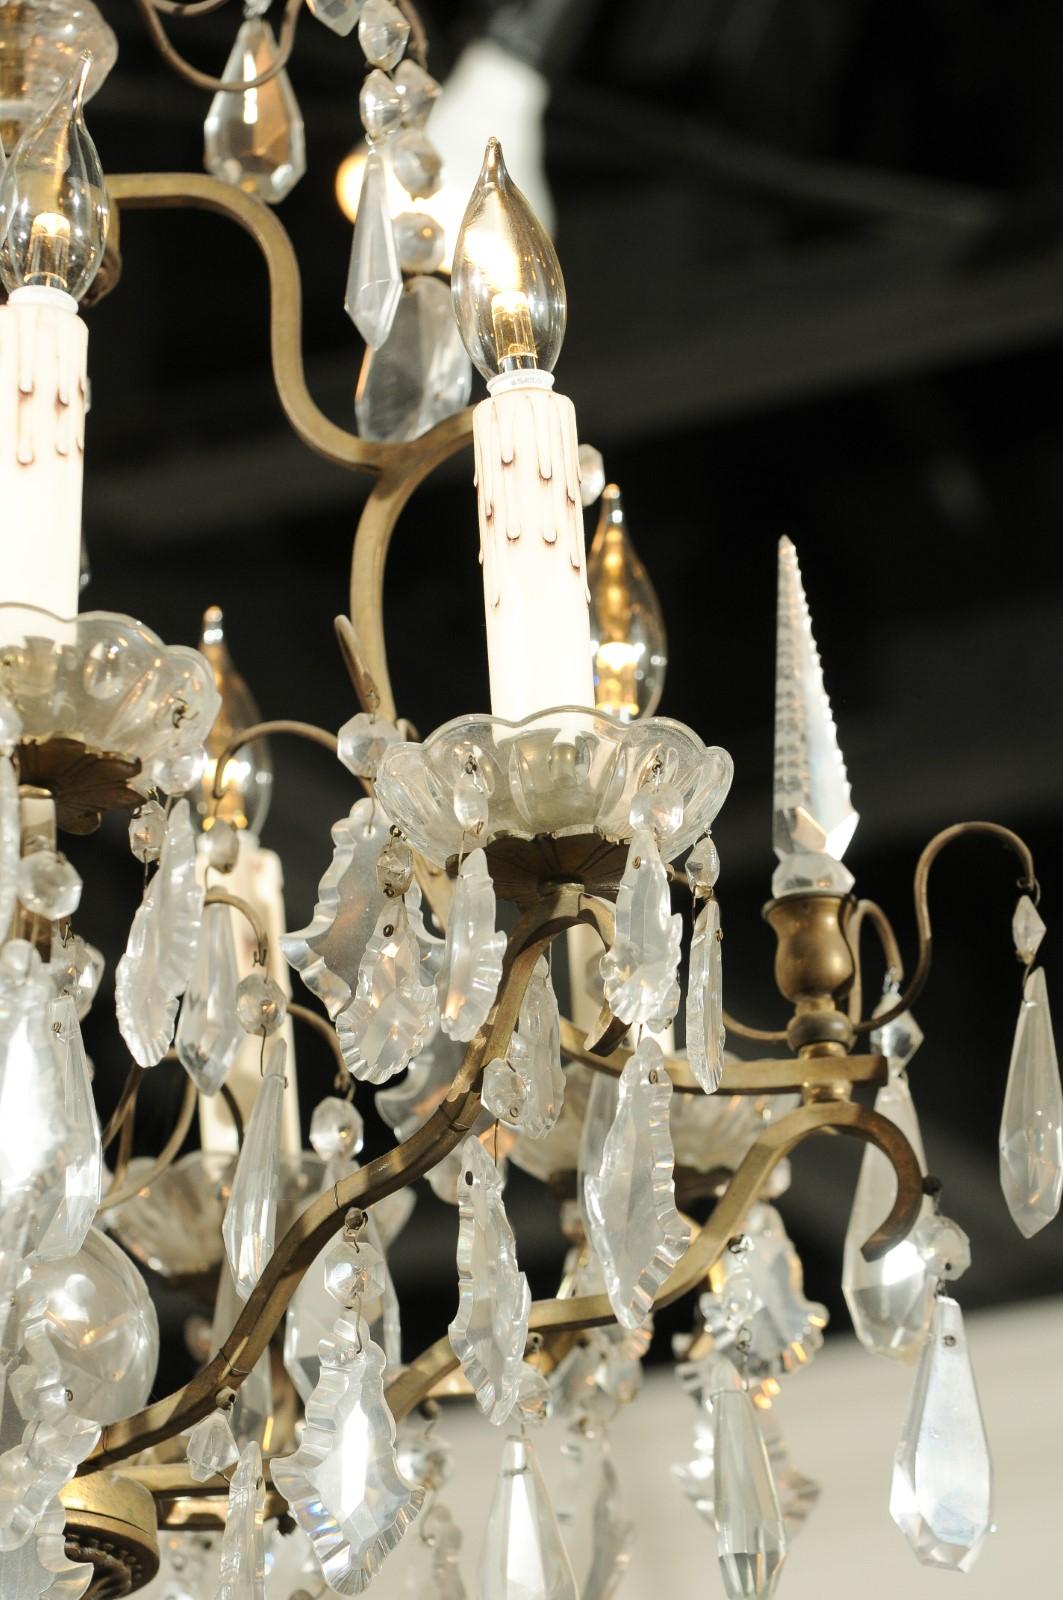 A French crystal and bronze six-light chandelier from the 19th century, with central crystal column and obelisks. Born in France during the politically dynamic 19th century, this exquisite six-light chandelier features a bronze armature, supporting